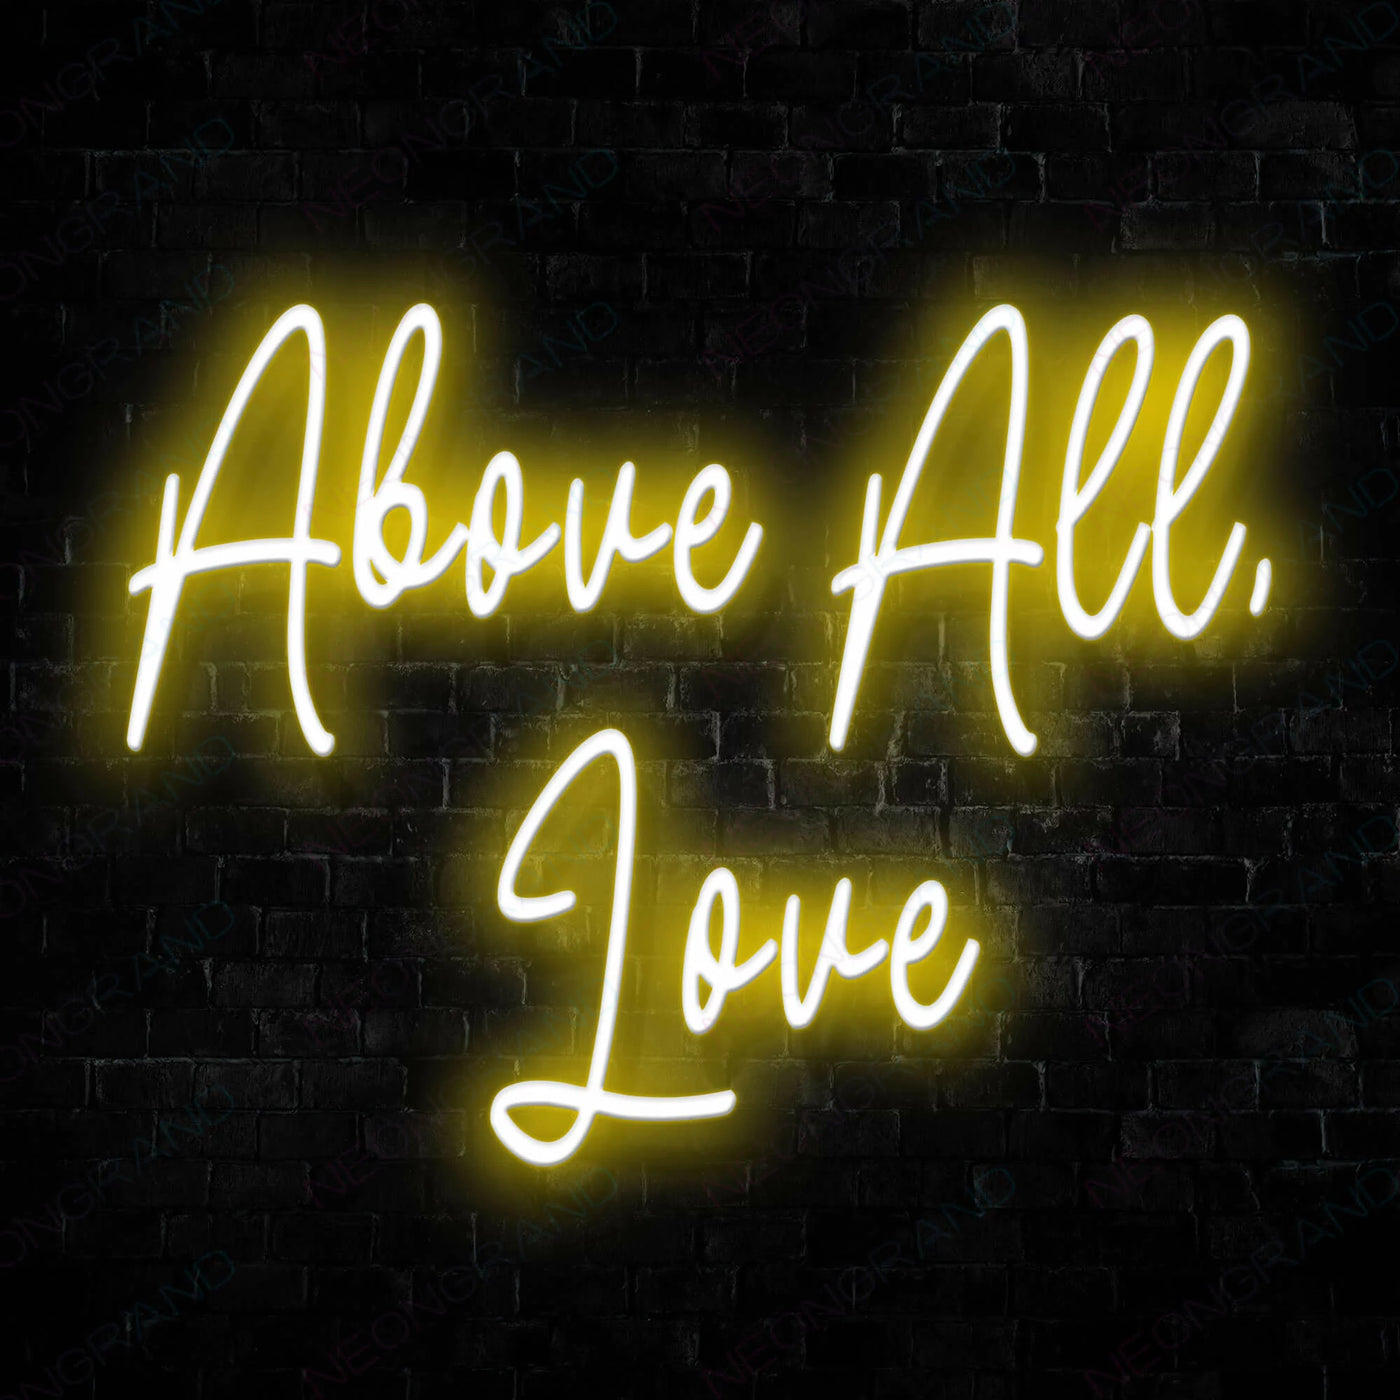 Above All Love Neon Sign Yellow